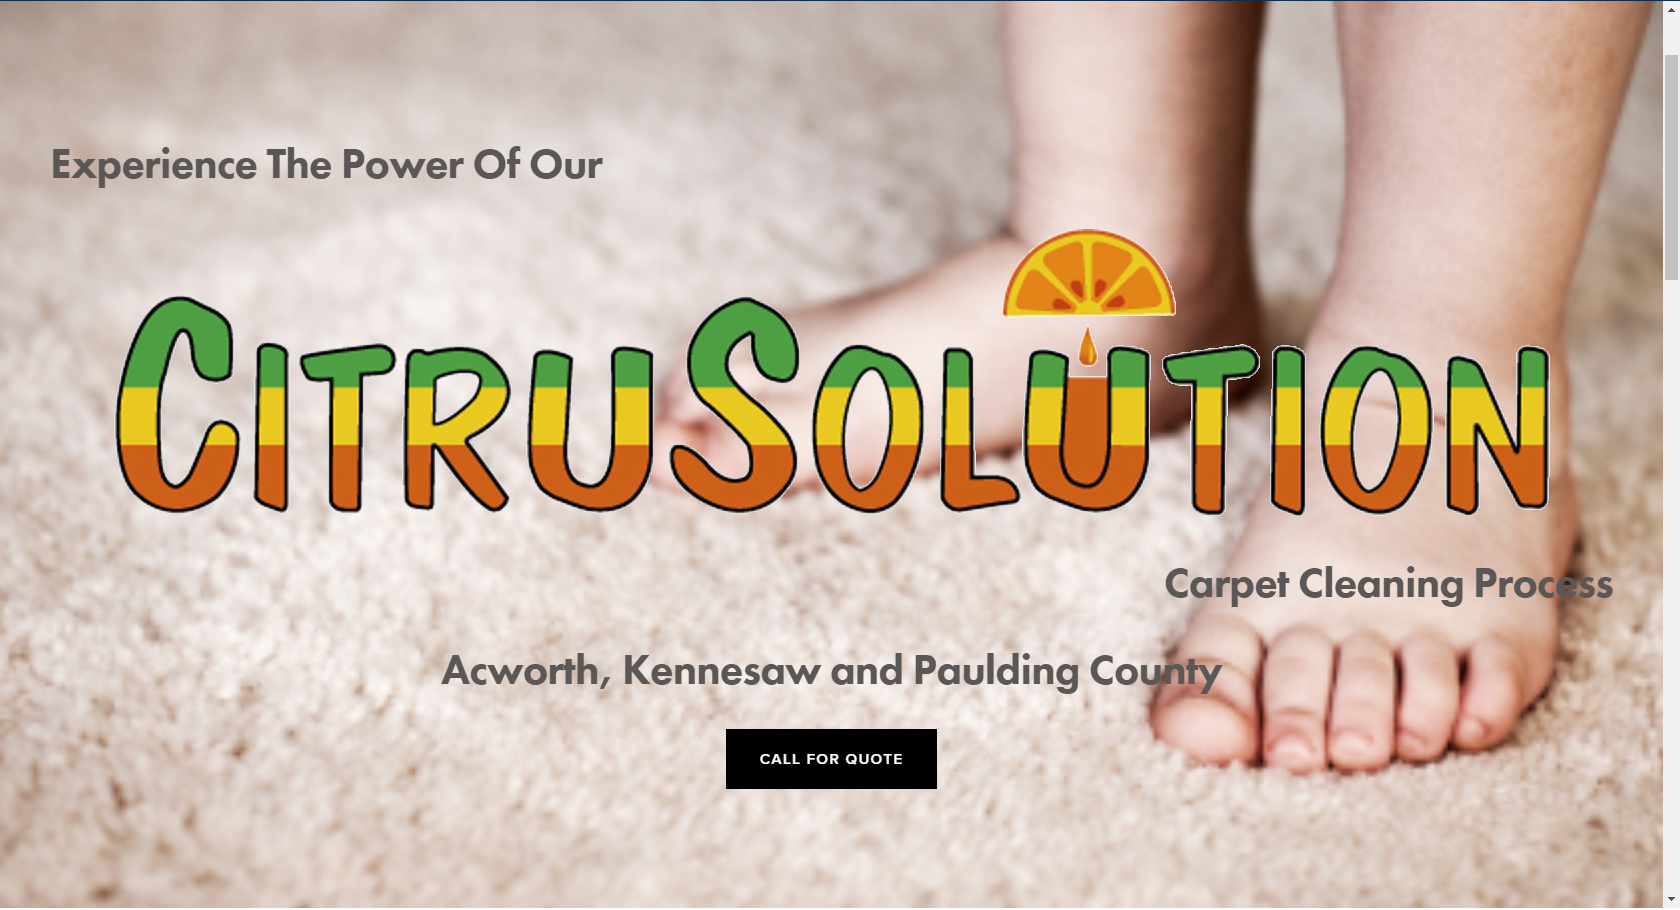 The Citrusolution Three Step Cleaning Process Carpet Best Paulding County Kennesaw And Acworth